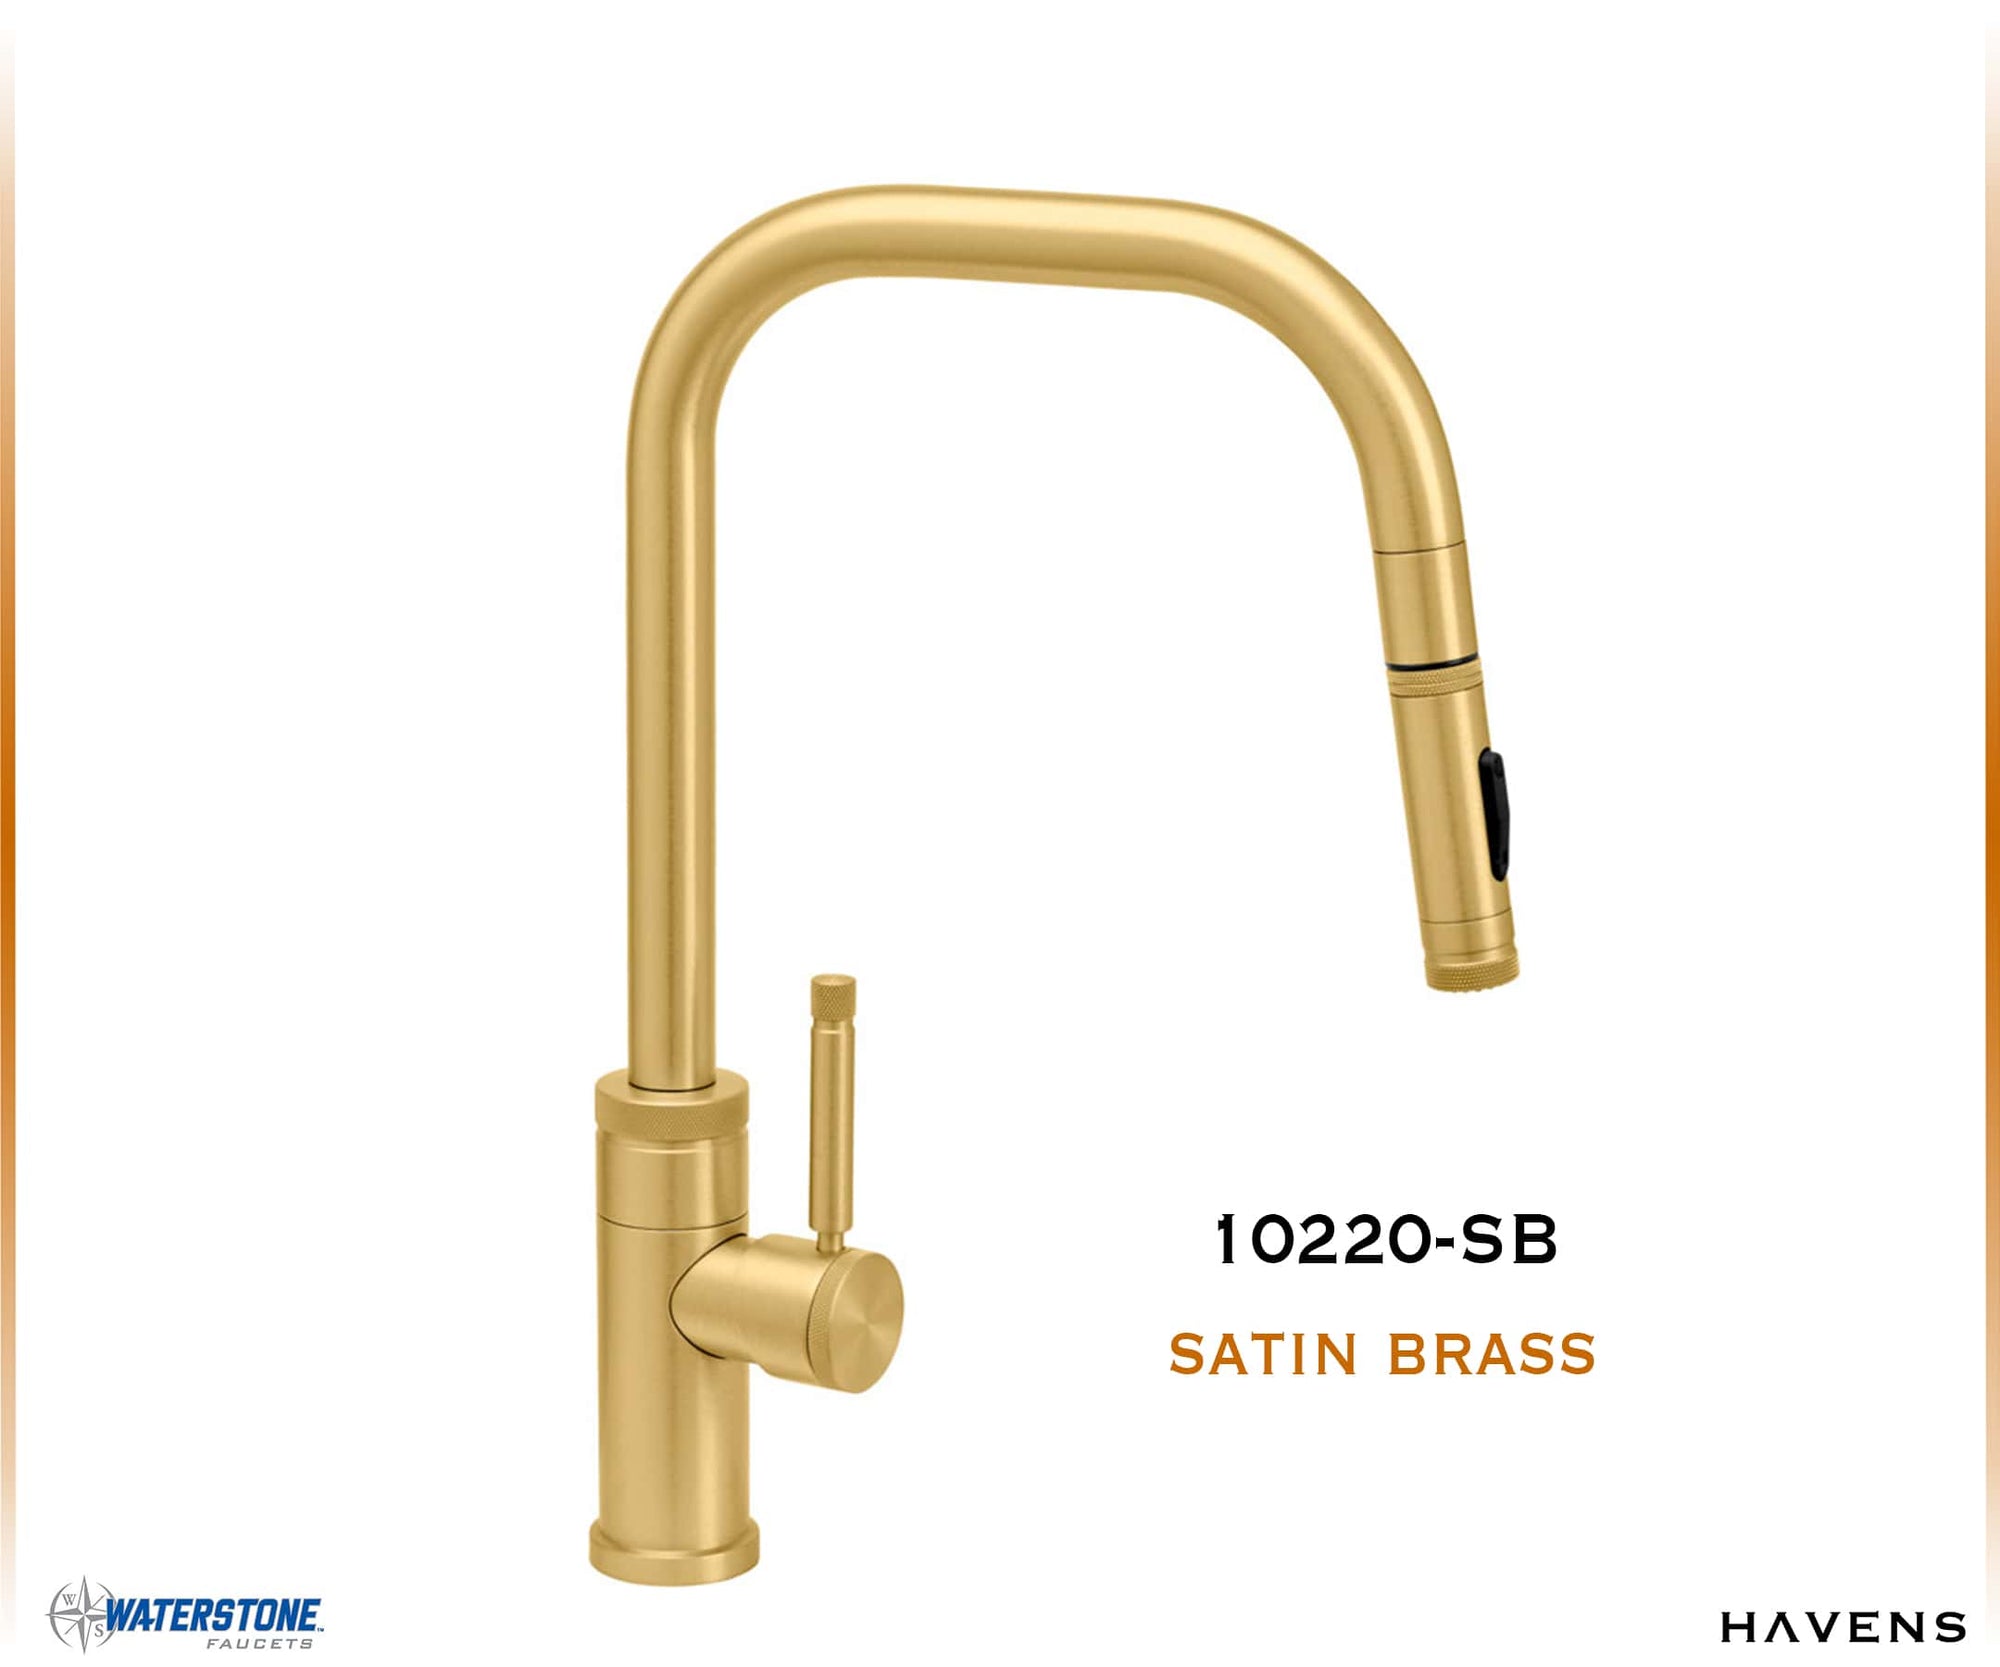 Waterstone Fulton Industrial PLP Angled Pulldown Faucet – 10220